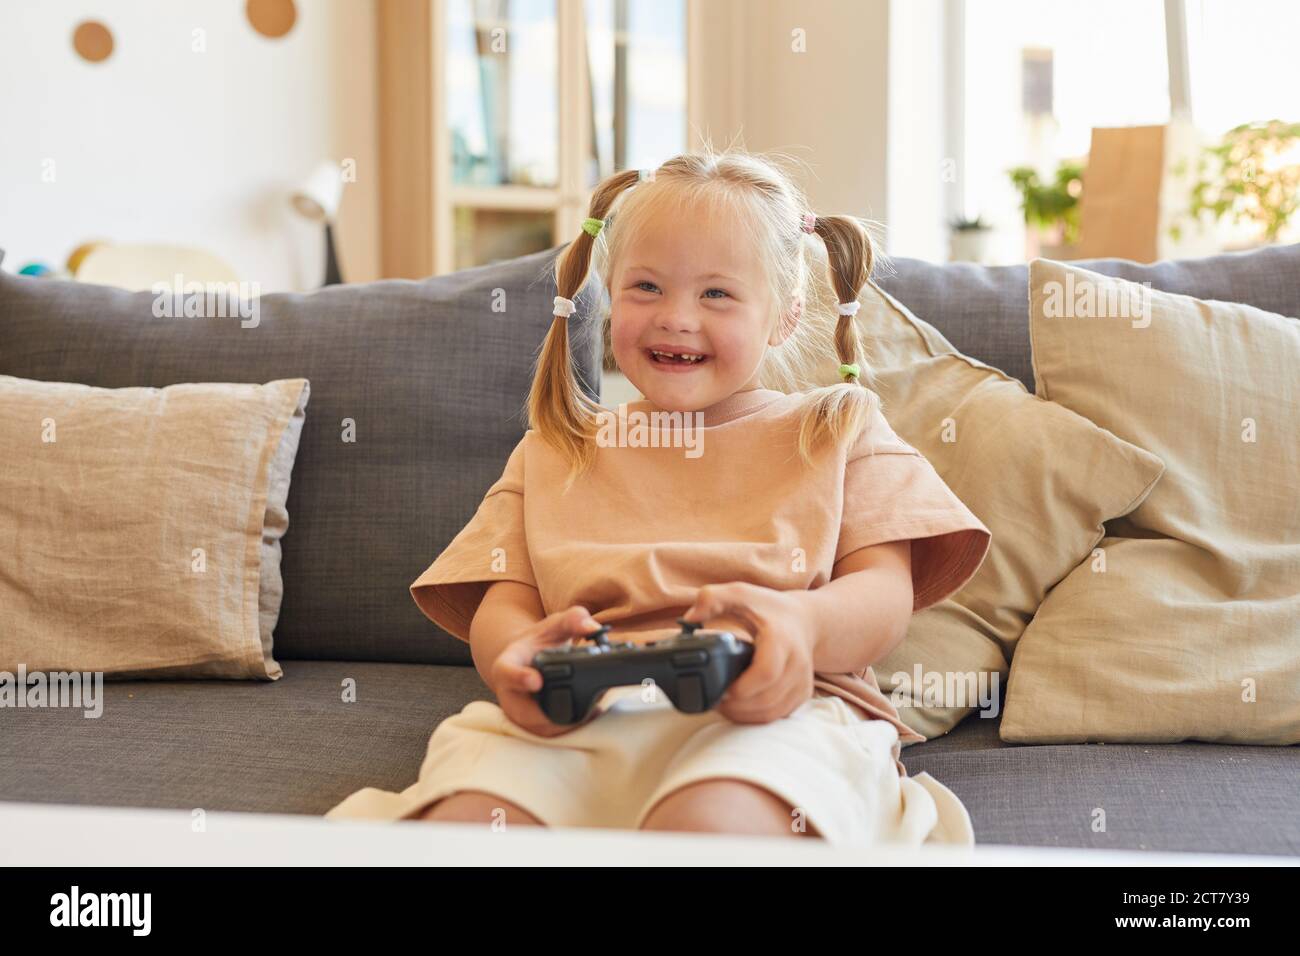 Portrait of cute girl with down syndrome playing video games and laughing happily while sitting on couch in living room, copy space Stock Photo